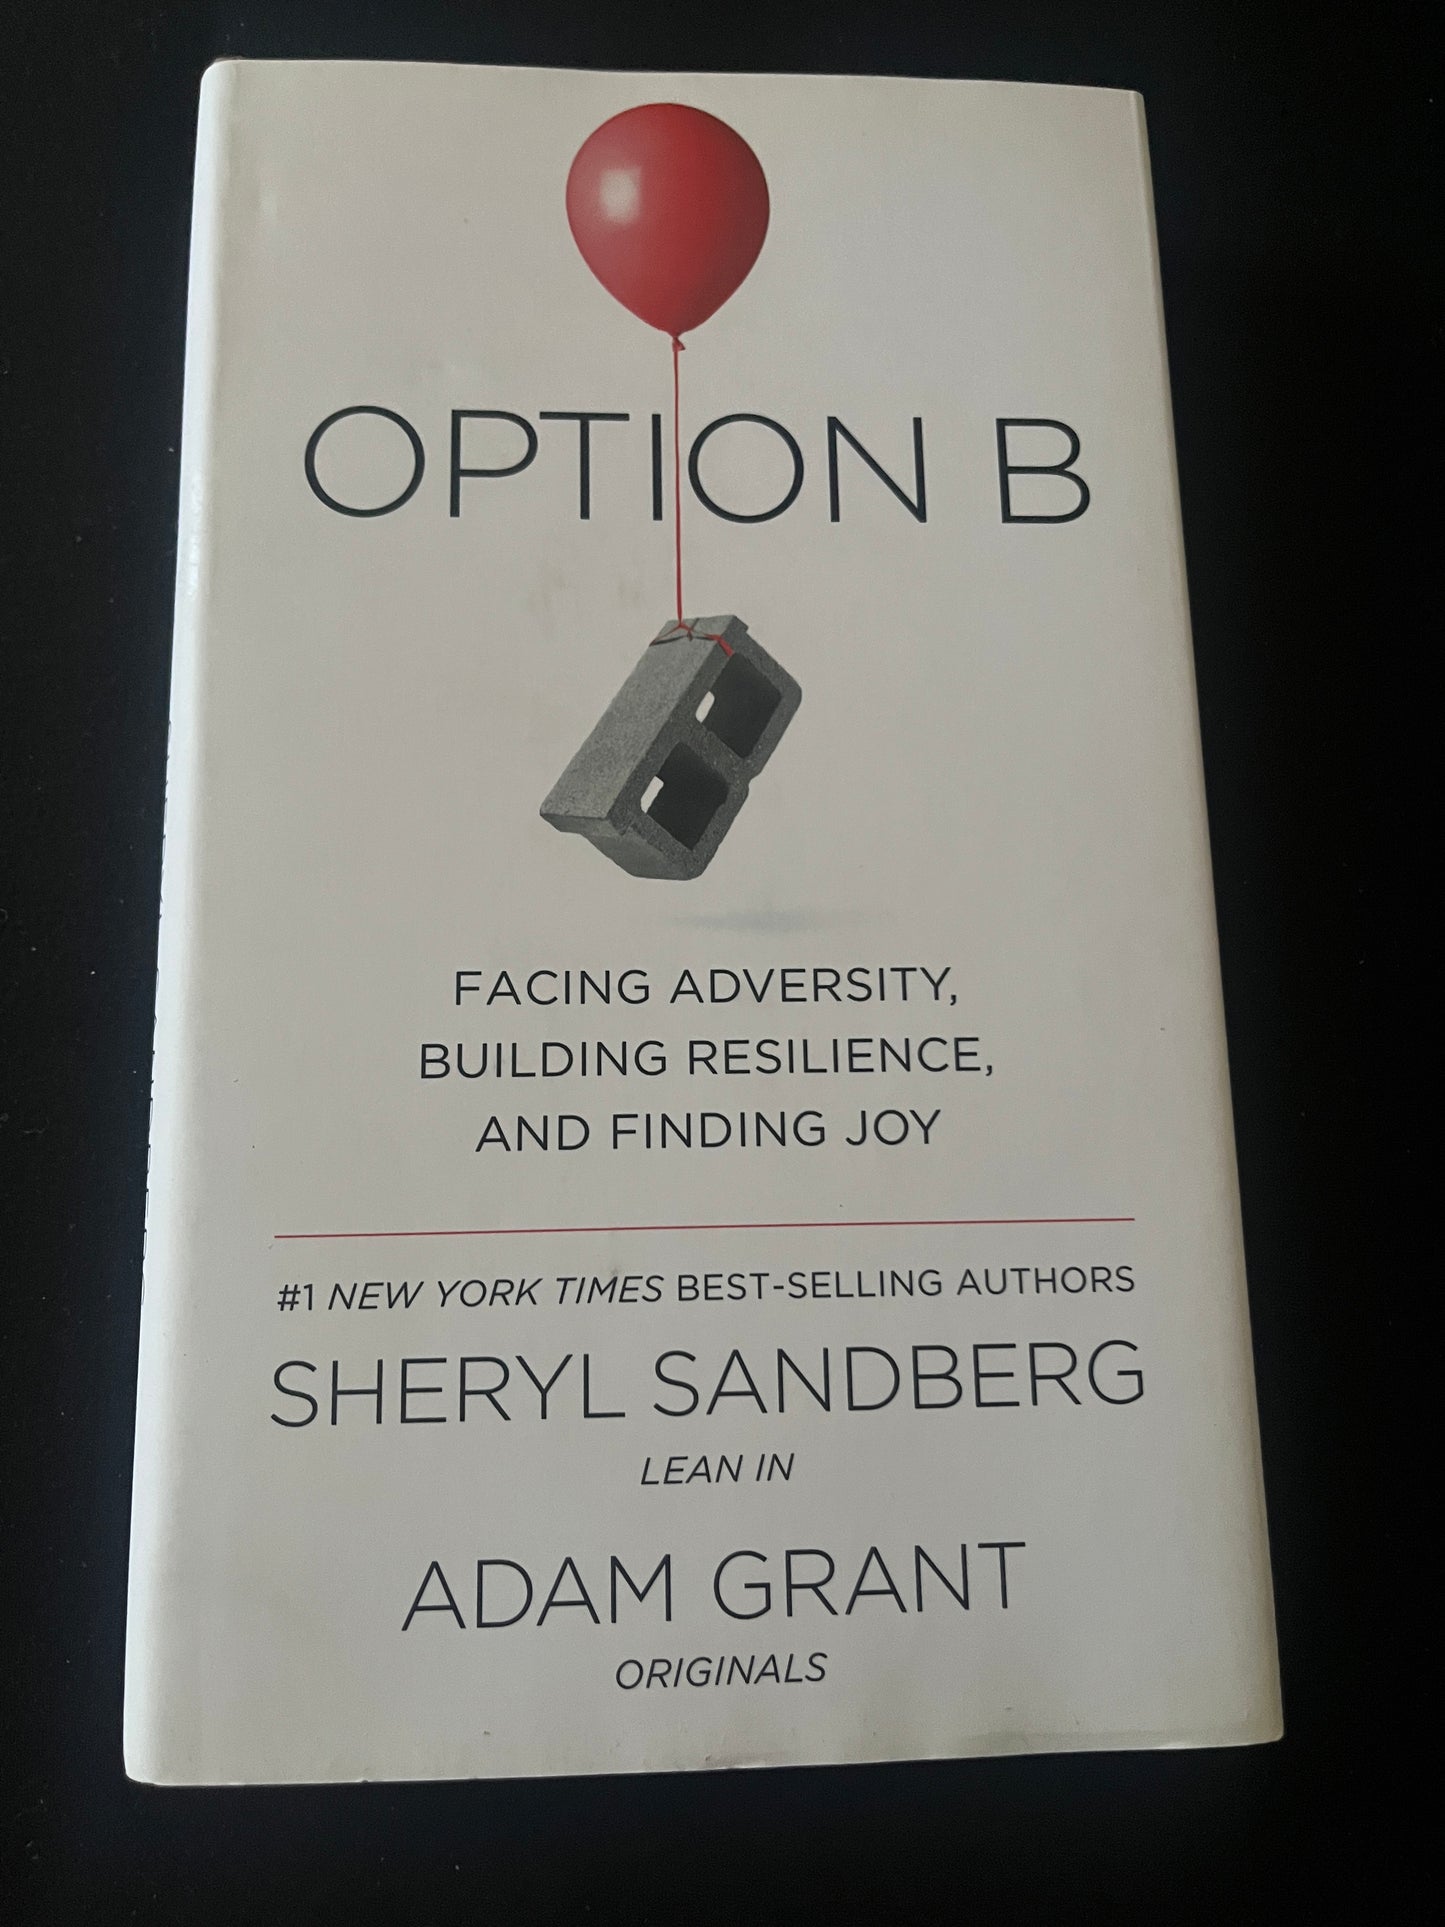 OPTION B: Facing Adversity, Building Resilience, and Finding Joy by Sheryl Sandberg and Adam Grant